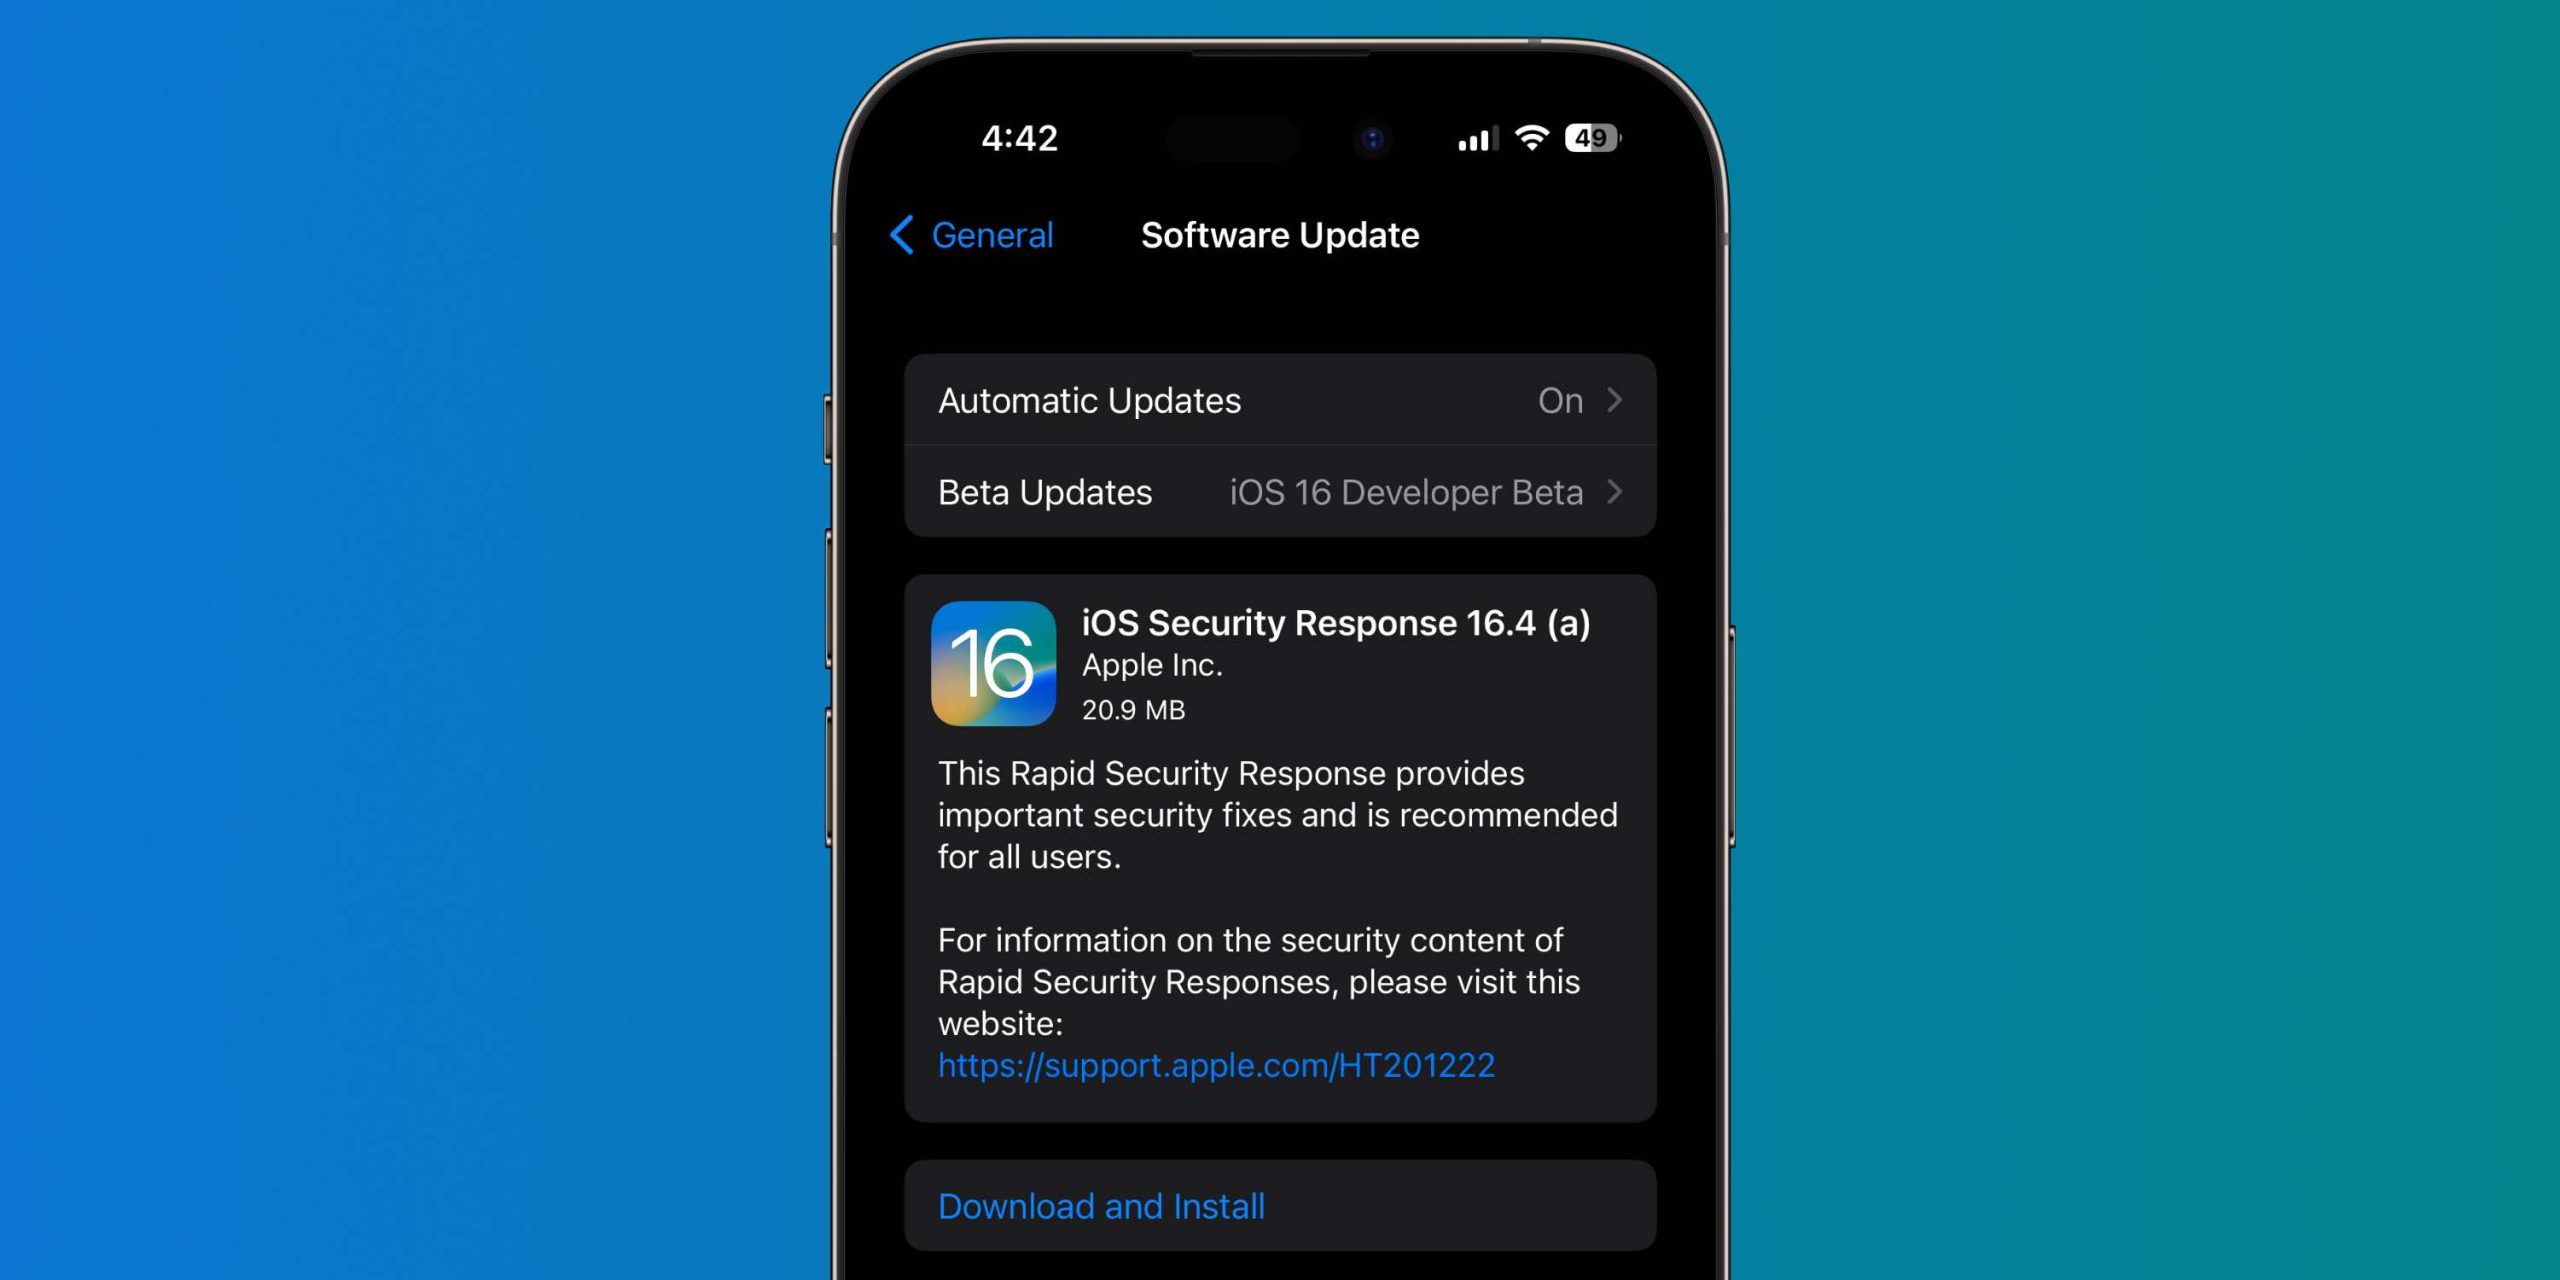 Apple pushes Rapid Security Response update for iOS 16.4 beta, may just be a test